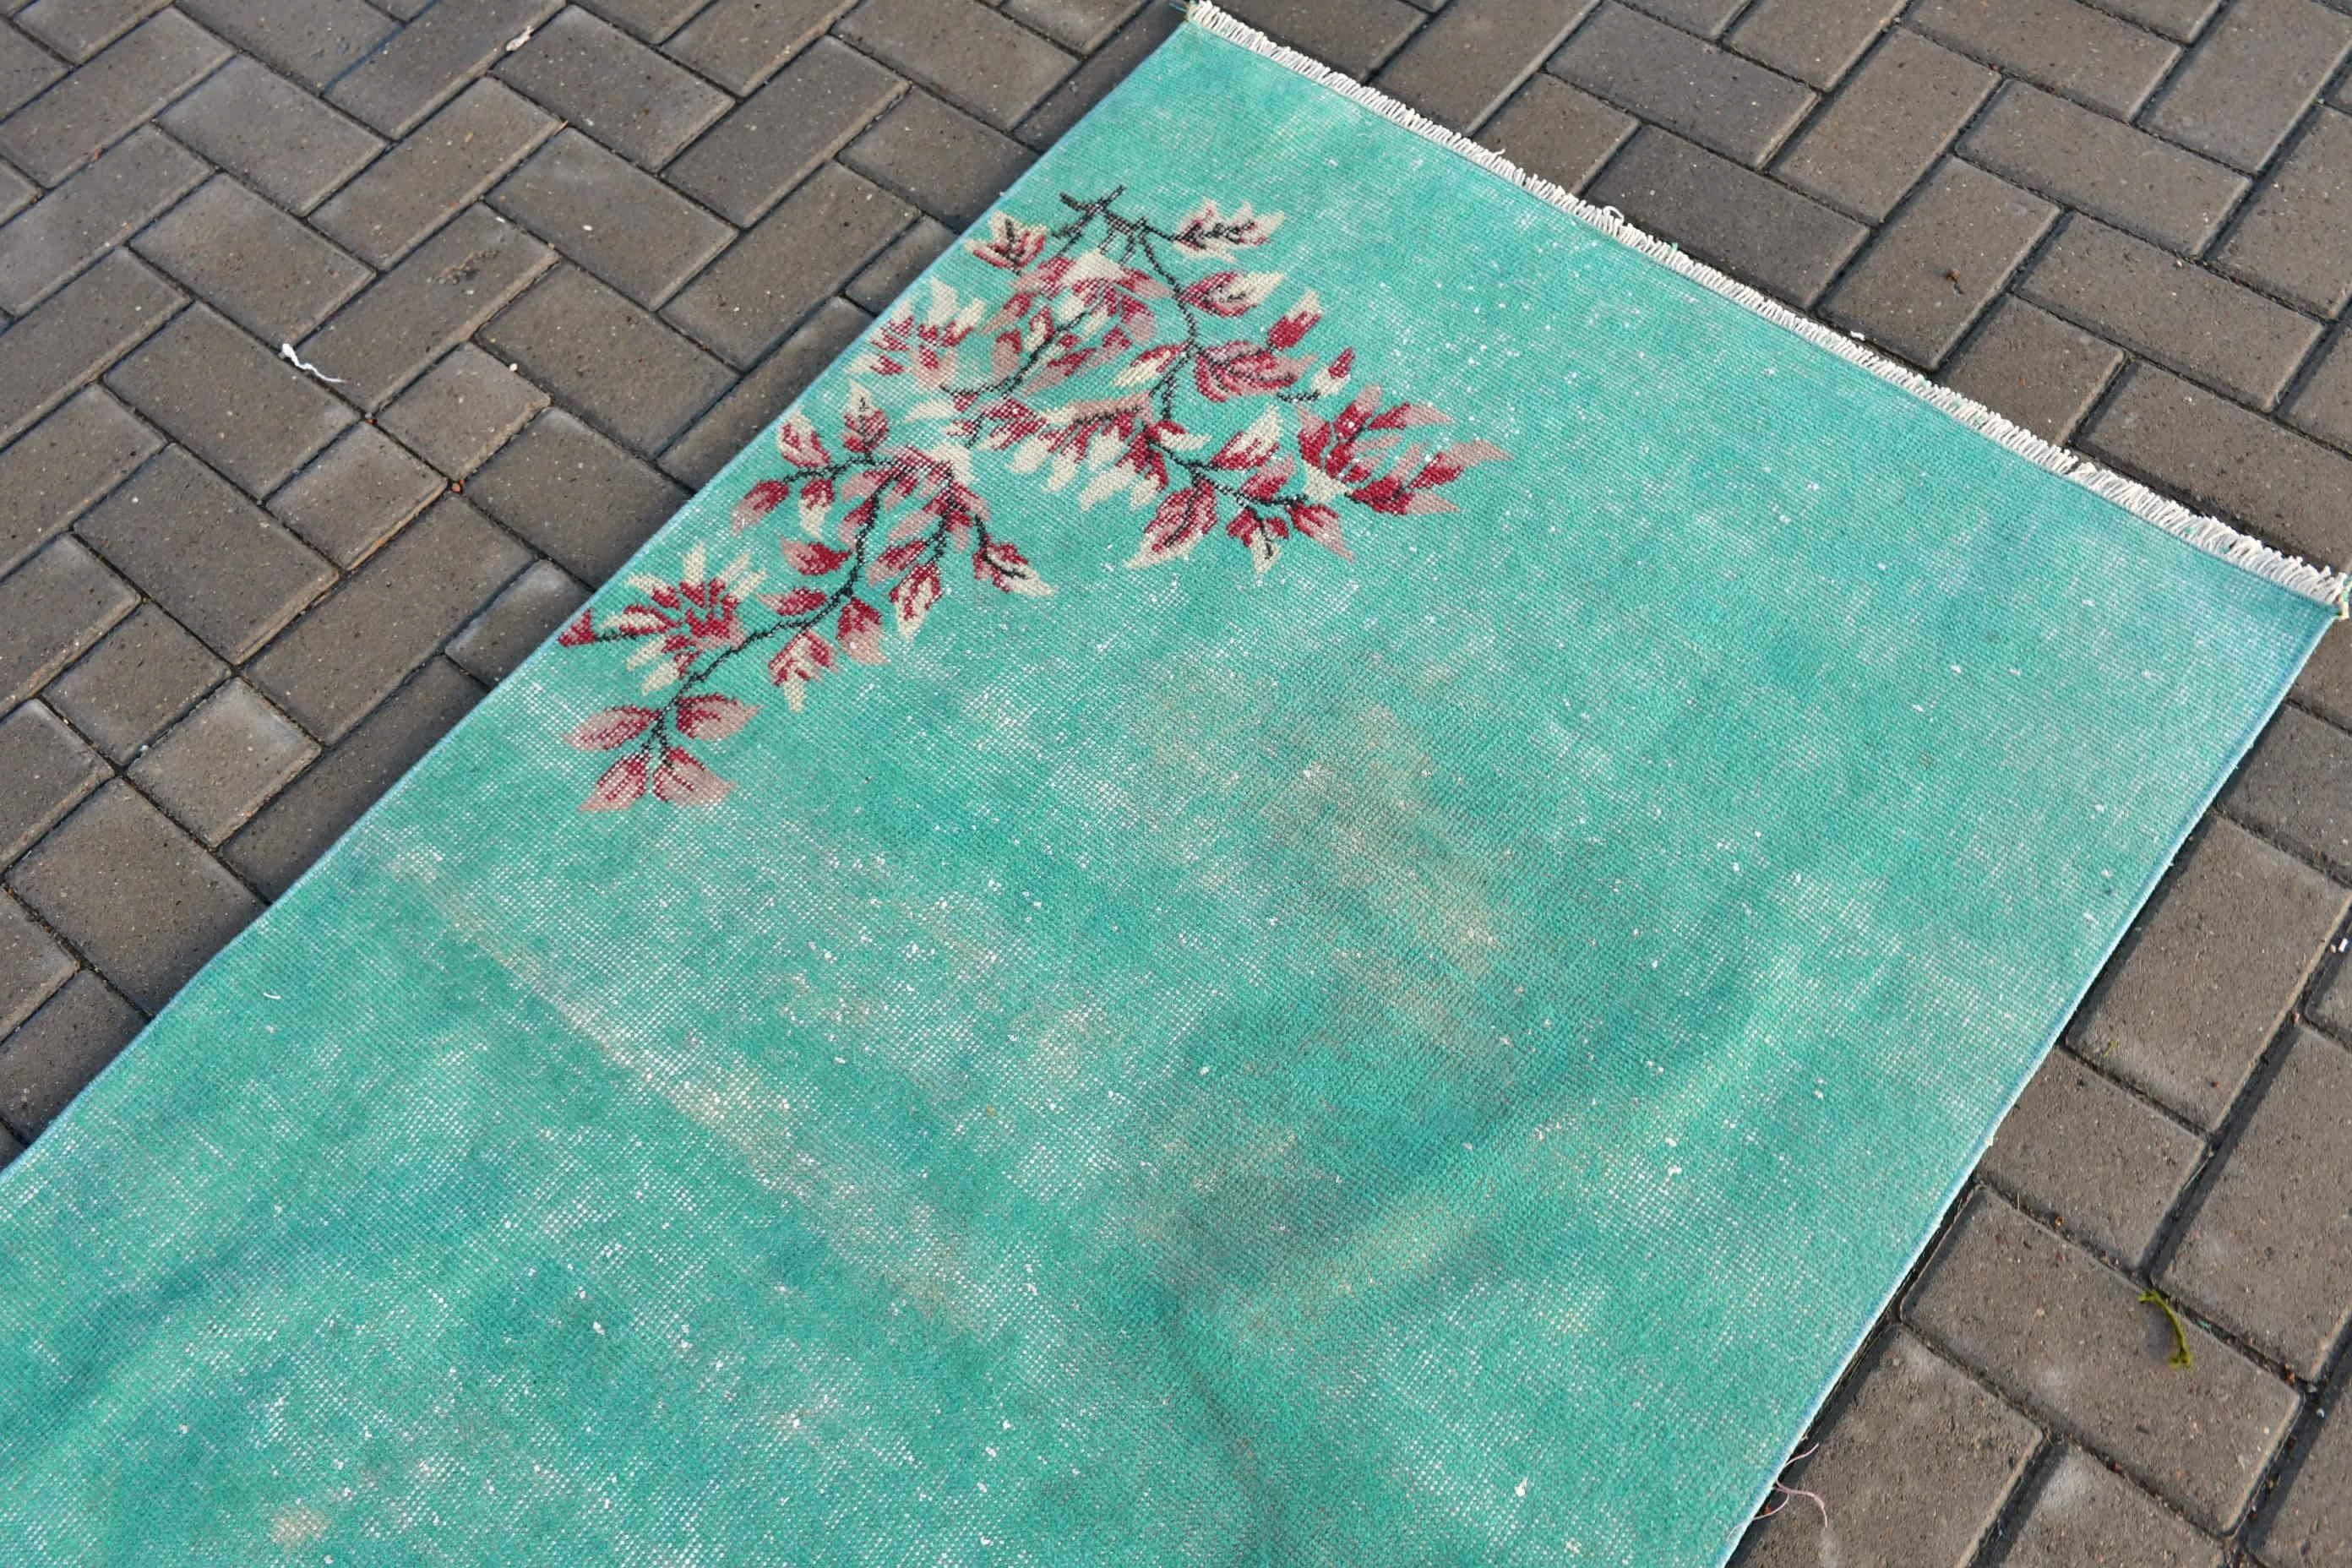 Turkish Rug, Entry Rugs, Rugs for Entry, Cool Rugs, 3.2x6.6 ft Accent Rug, Vintage Rugs, Bedroom Rug, Floor Rug, Green Kitchen Rugs